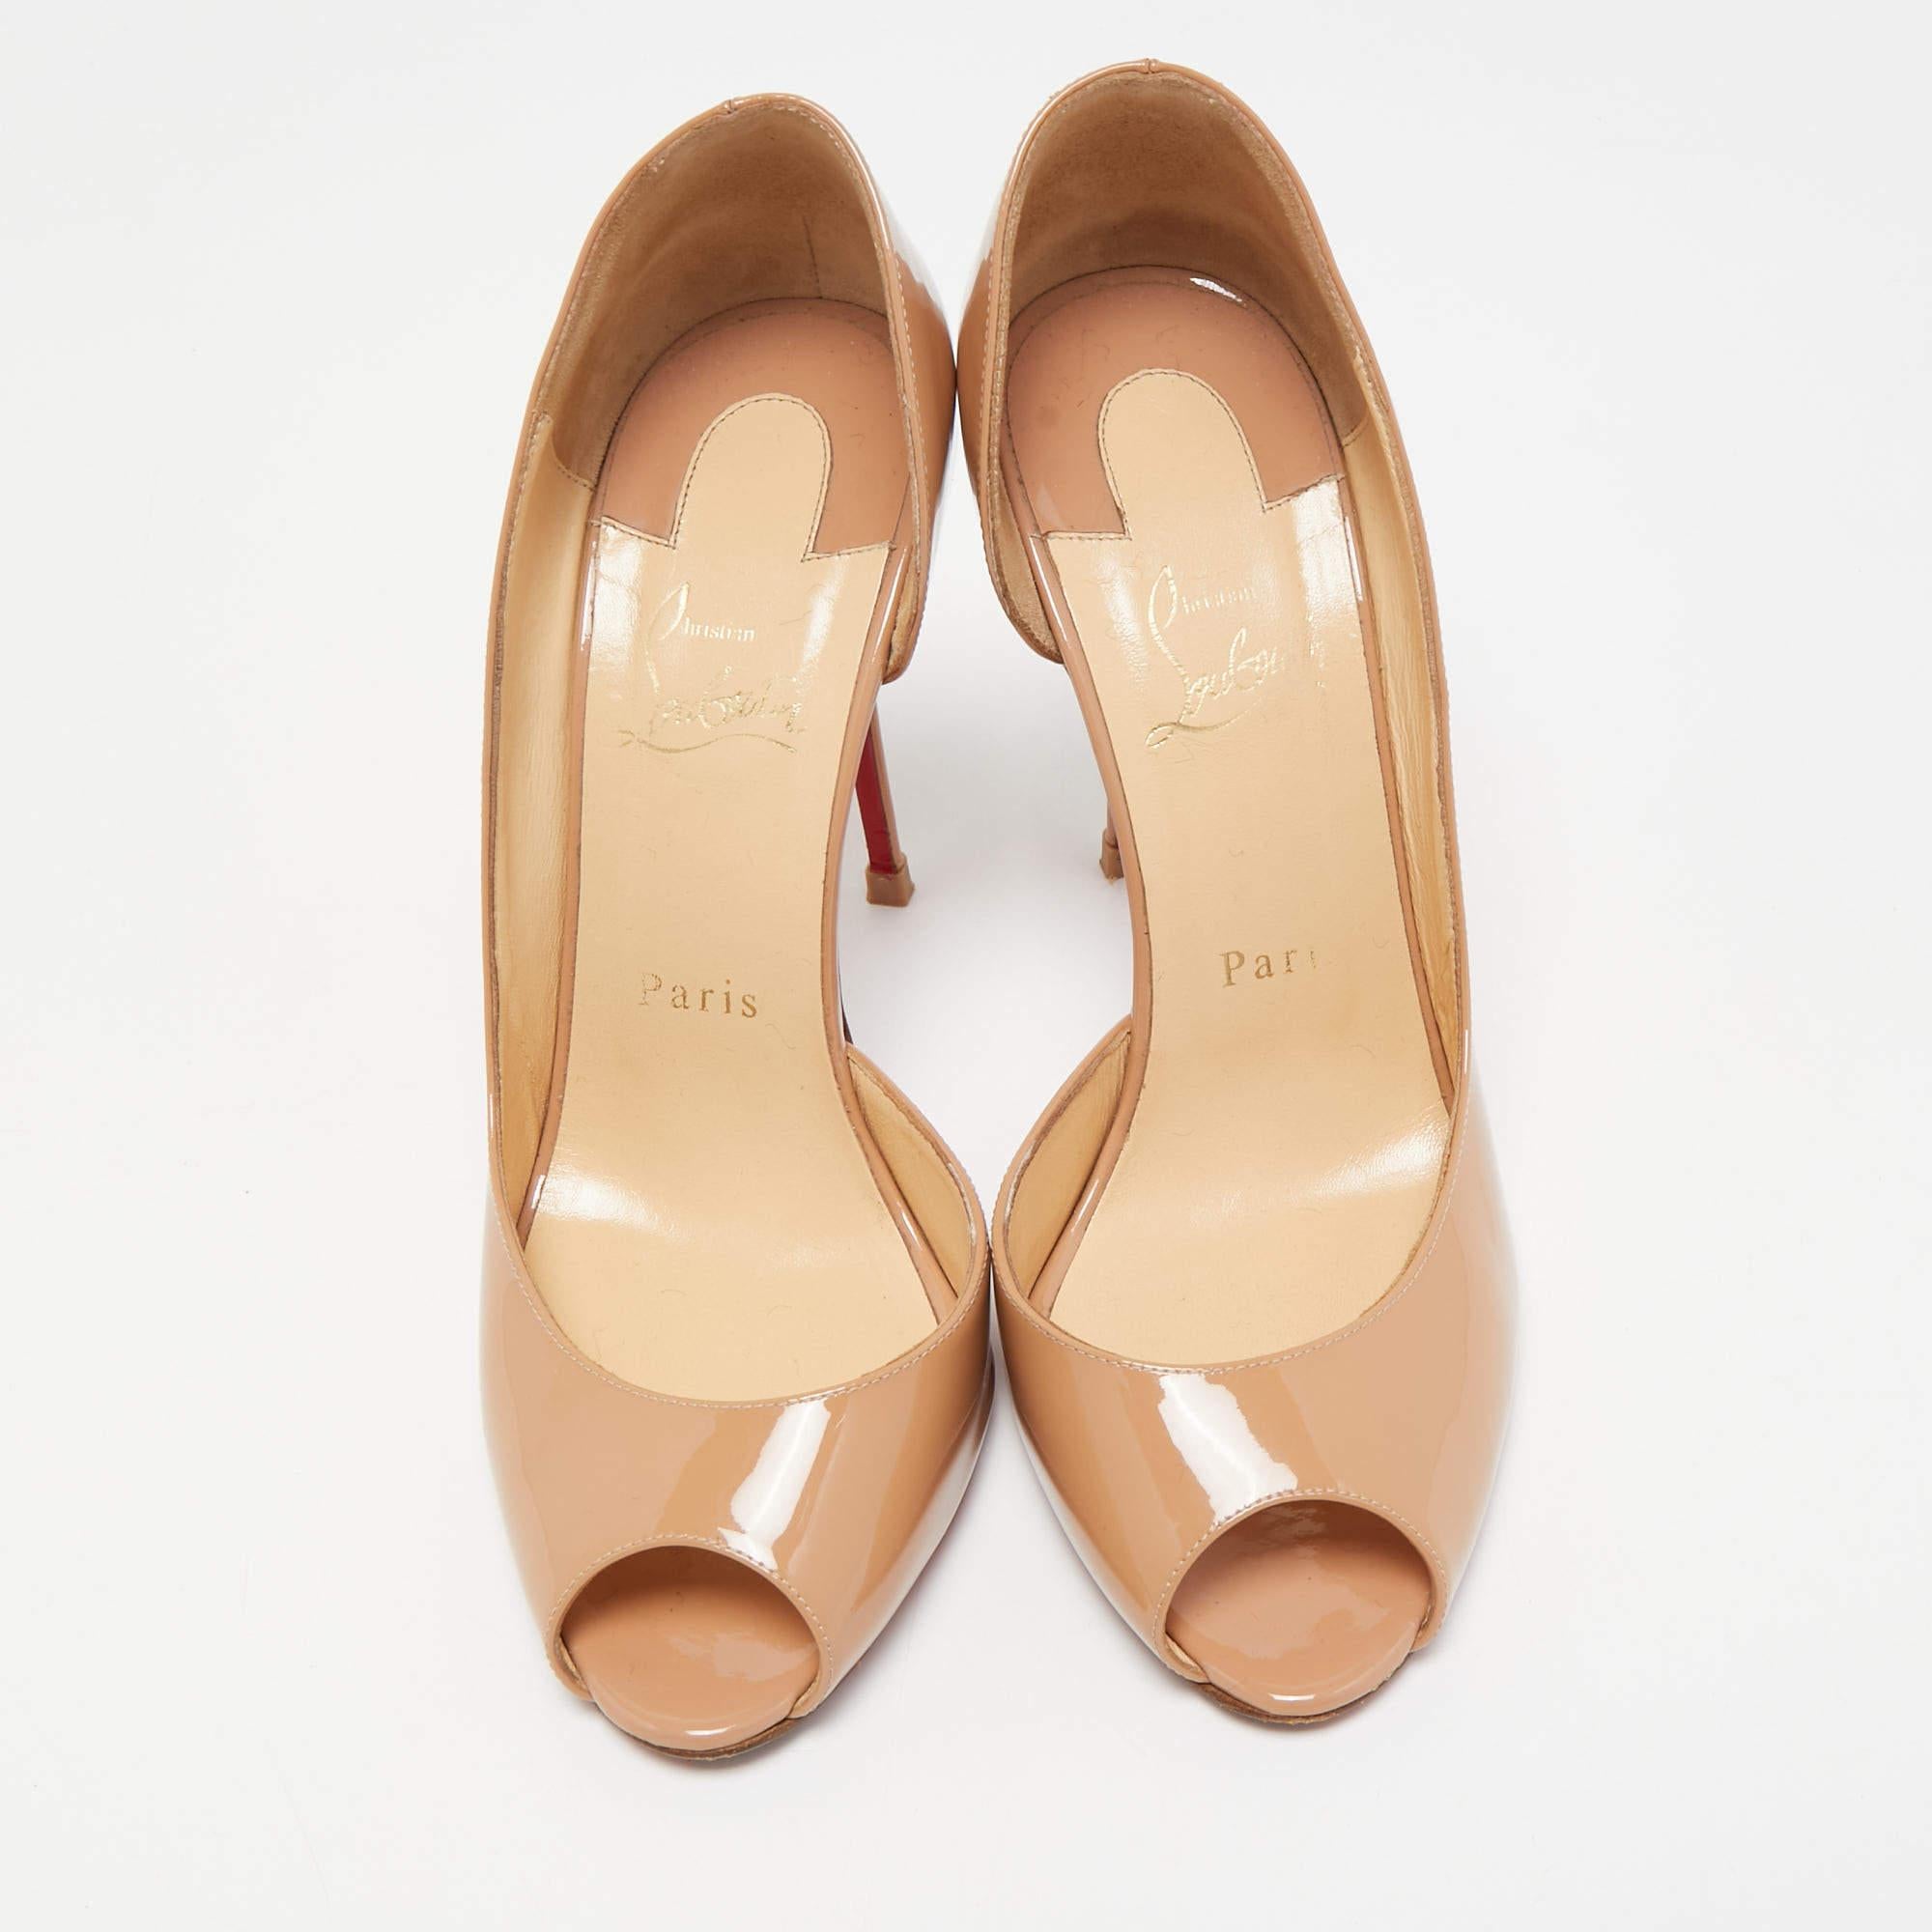 Christian Louboutin Beige Patent Leather Demi You Pumps Size 38 For Sale 1